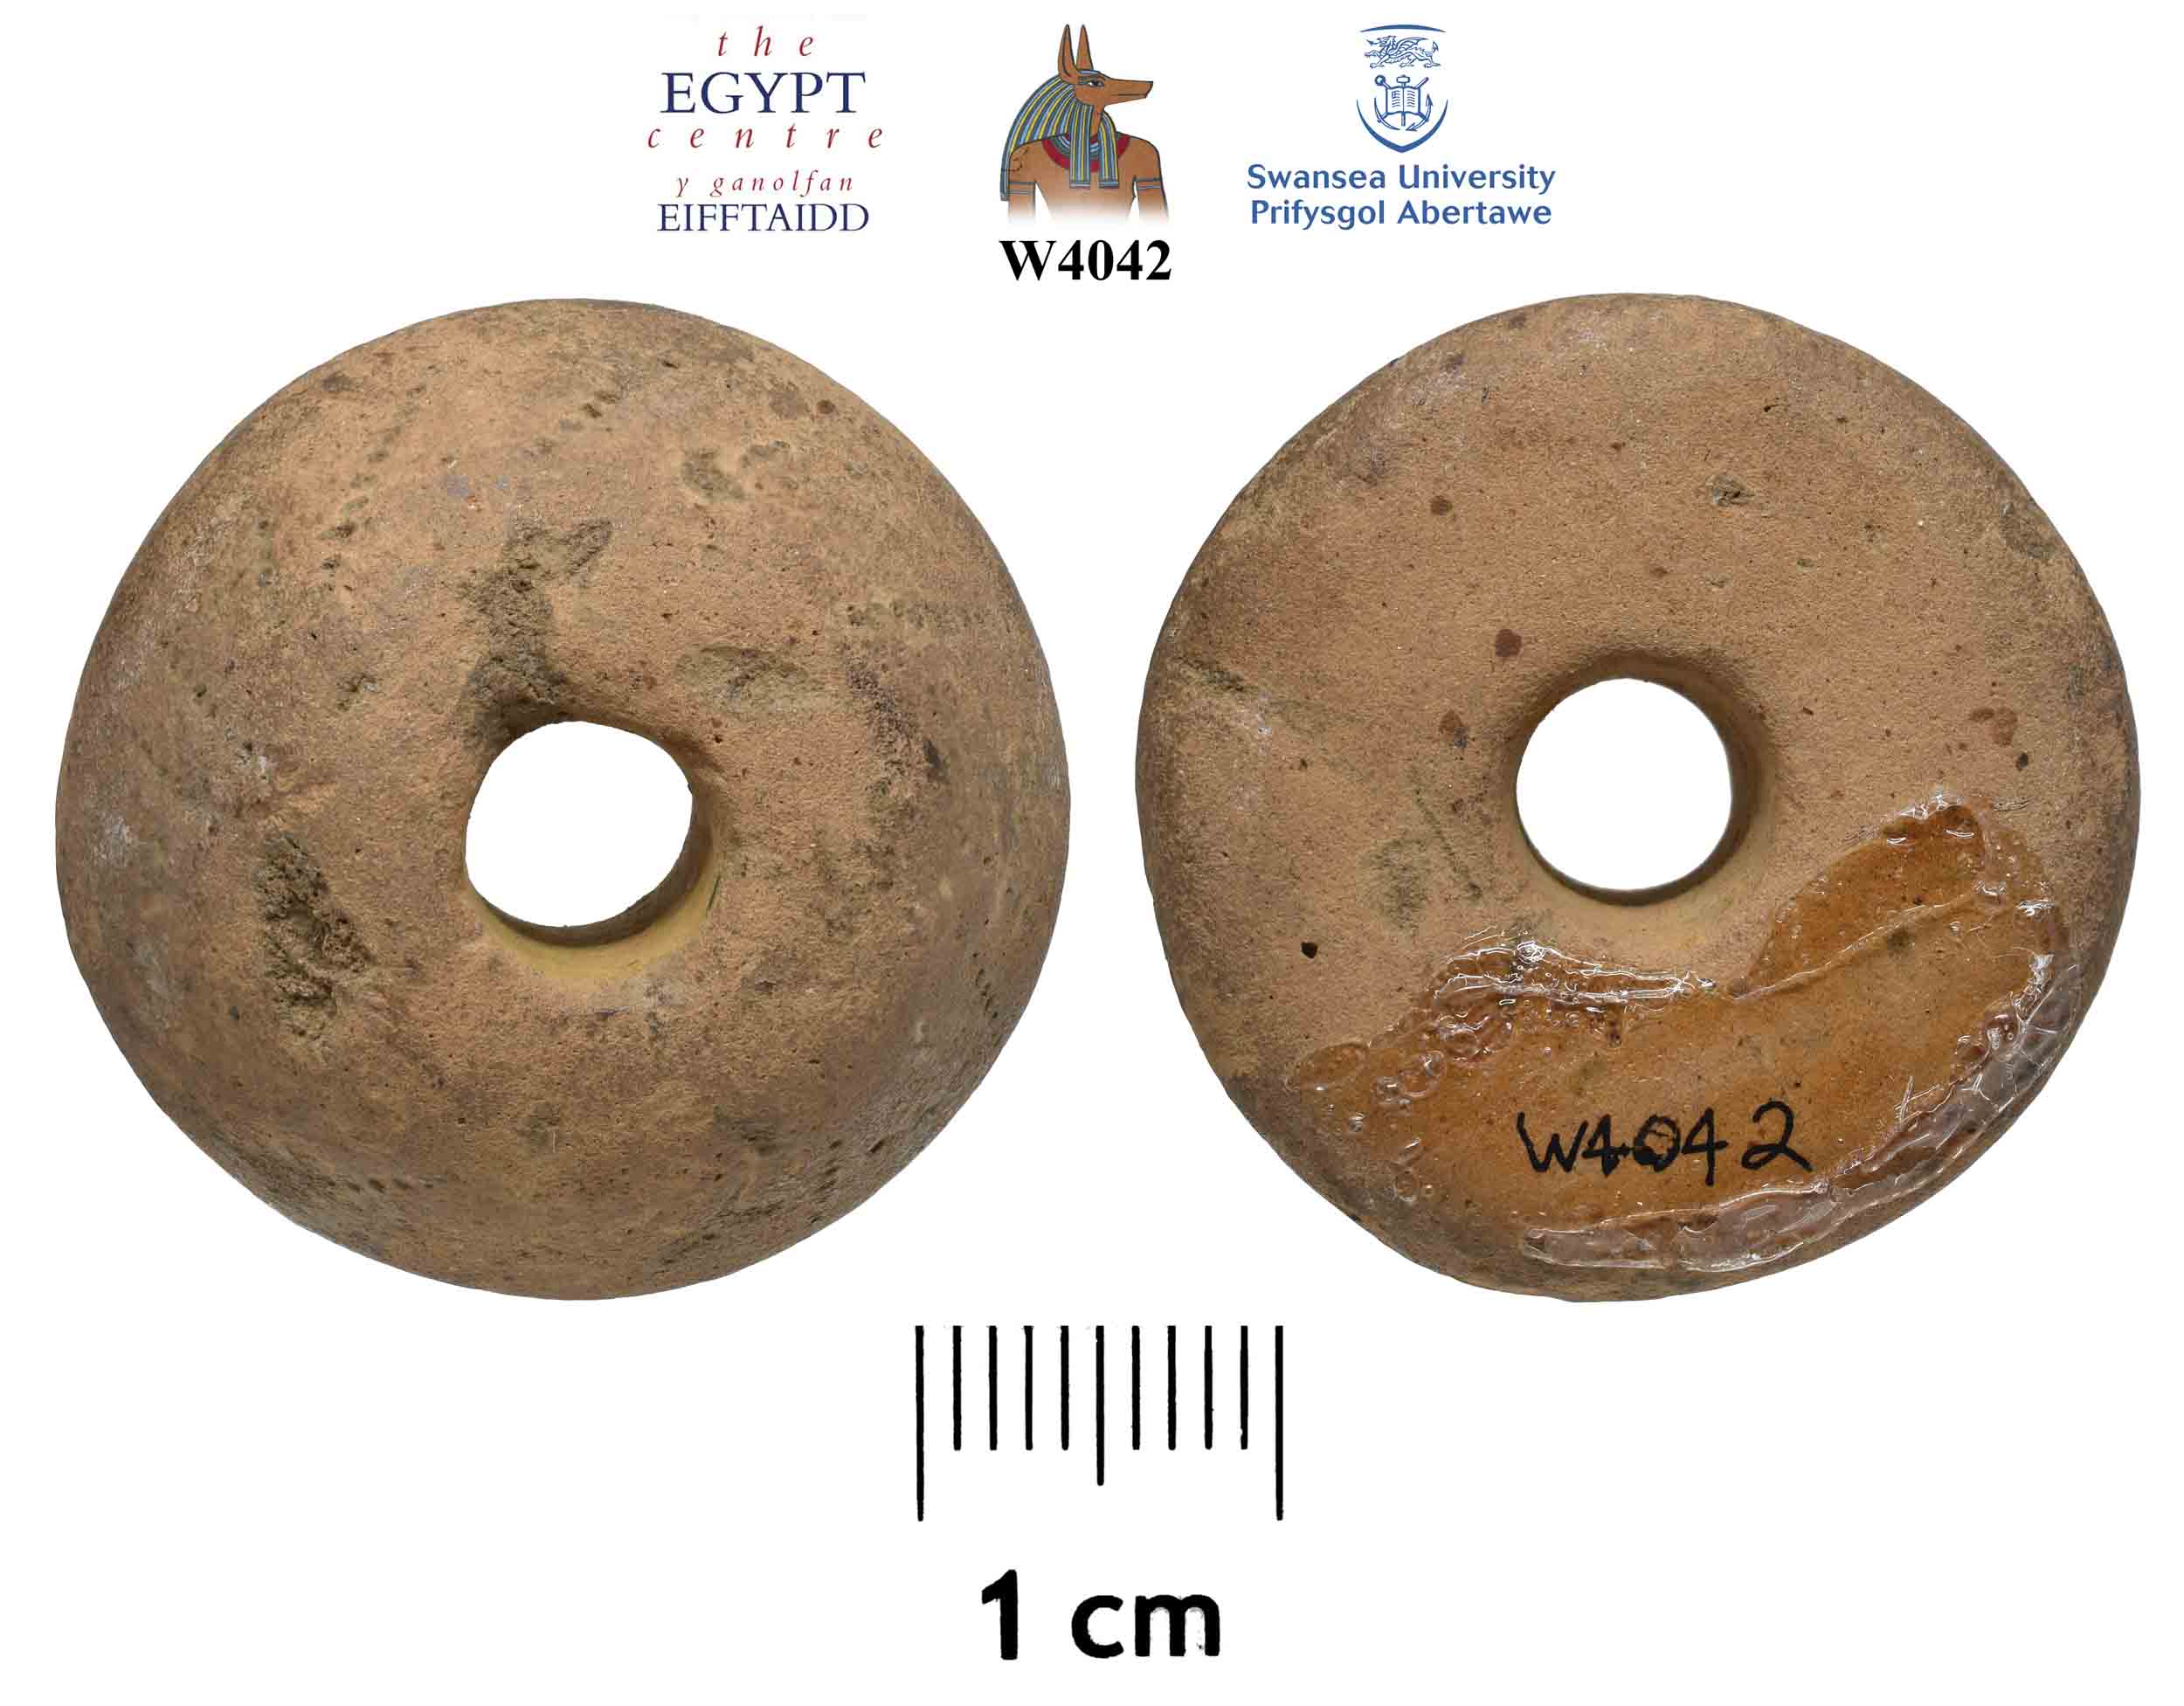 Image for: Spindle whorl